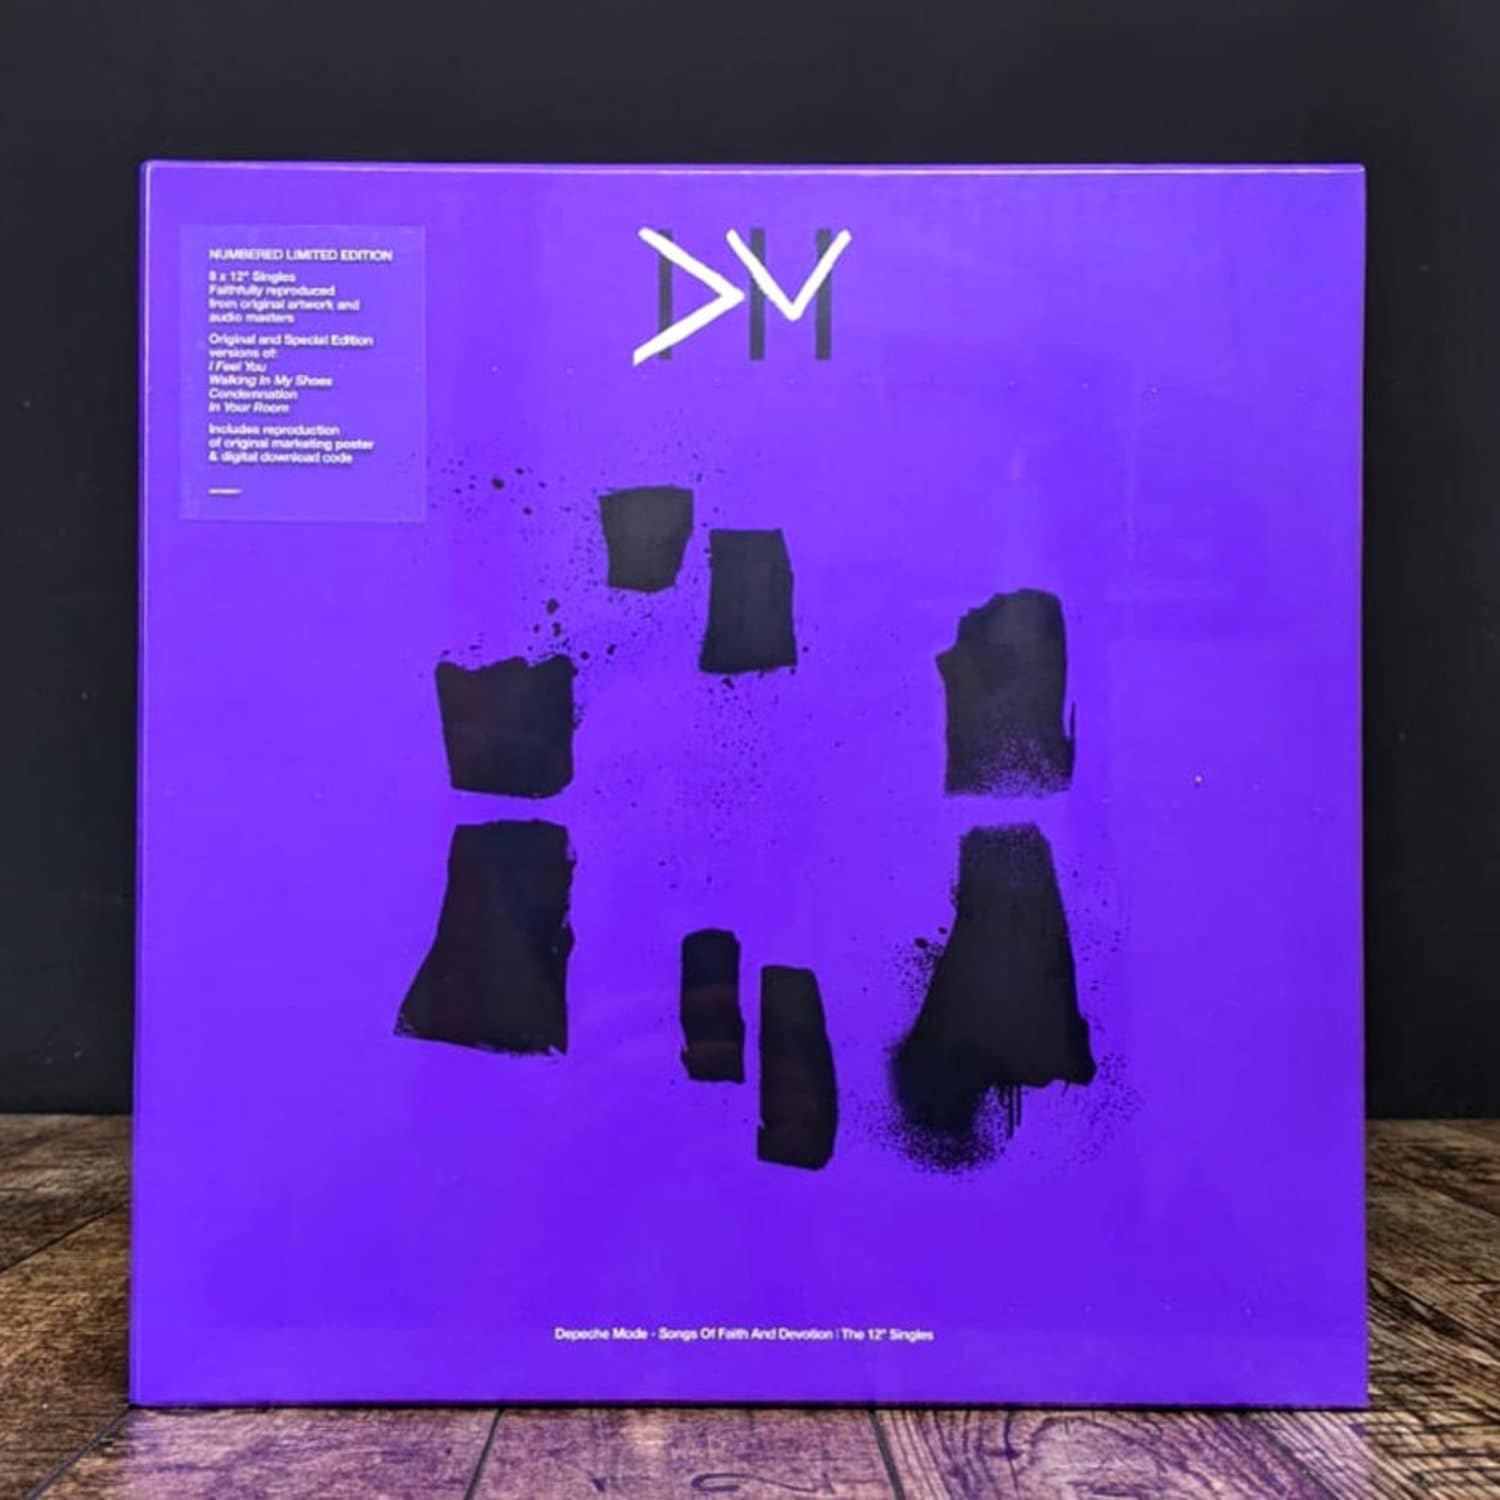 Depeche Mode - SONGS OF FAITH AND DEVOTION-THE 12Inch SINGLES 